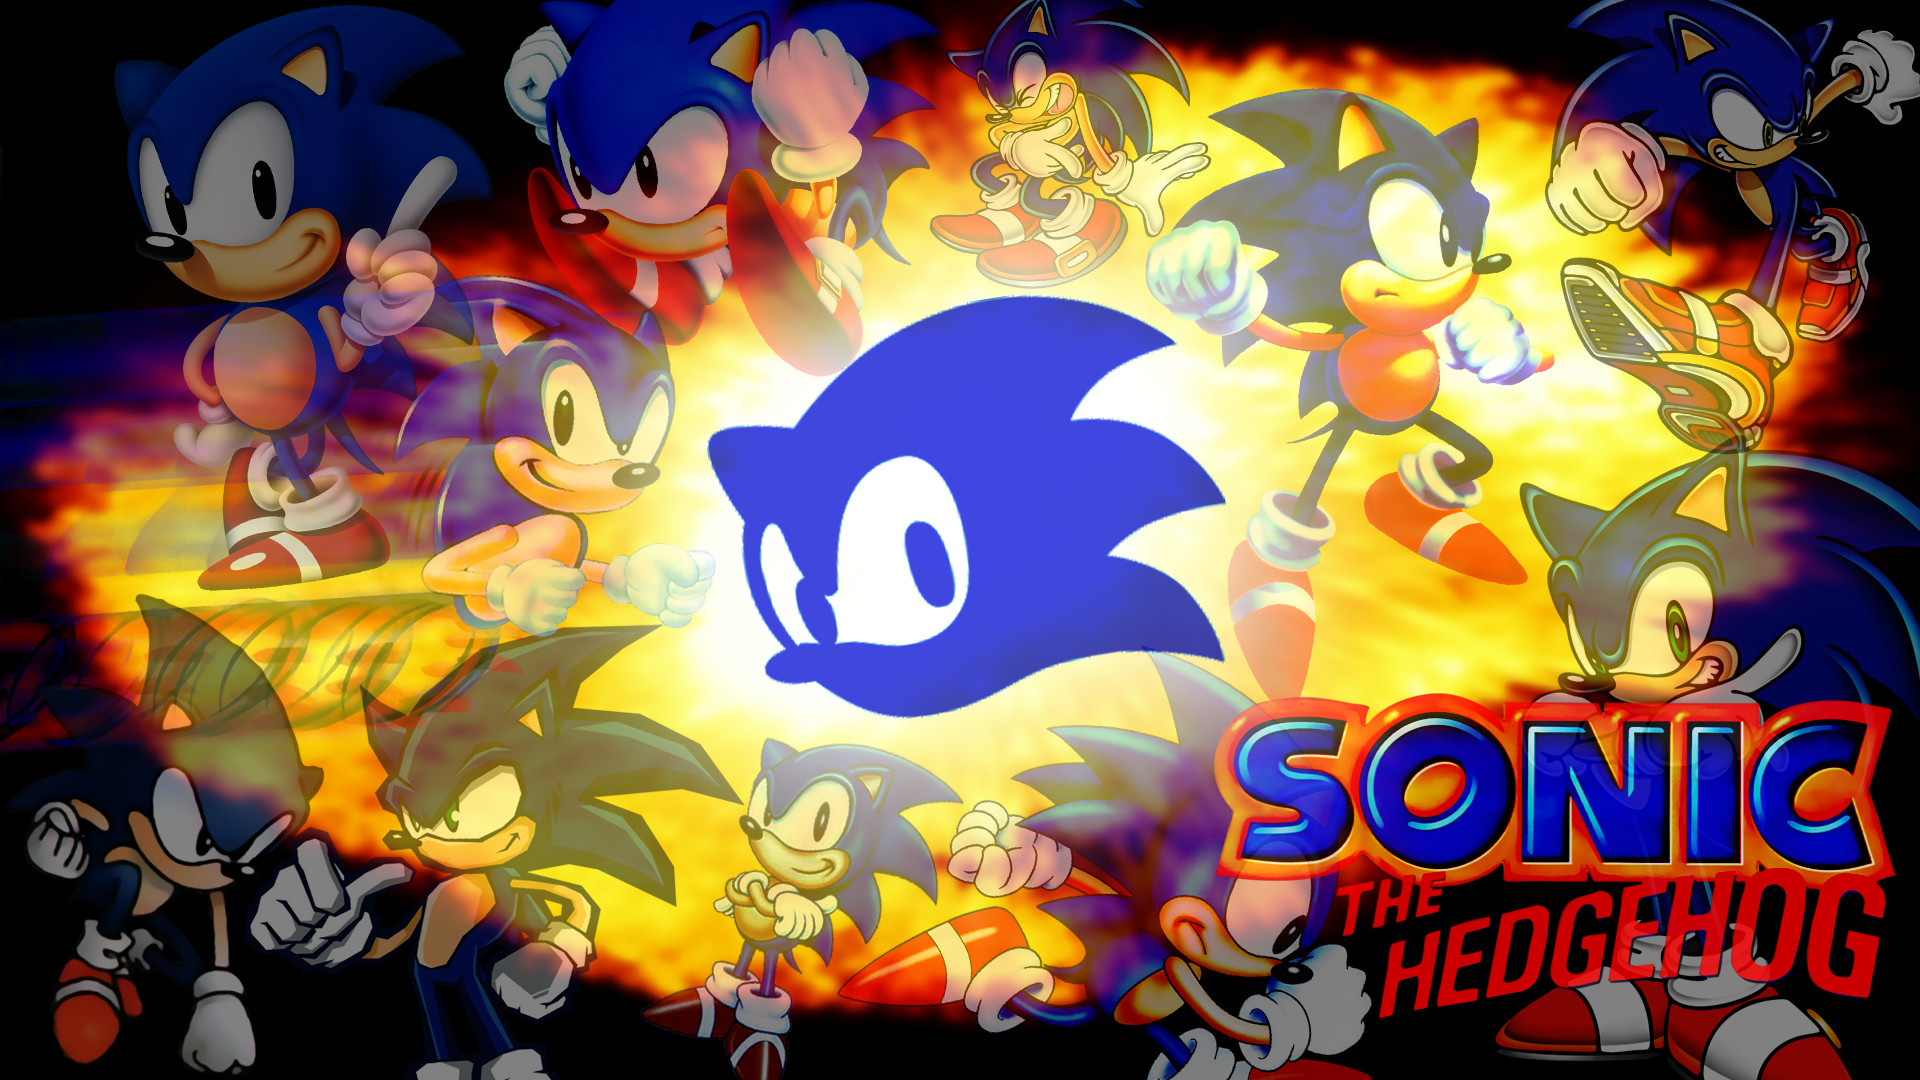 1920x1080 247 Sonic the Hedgehog HD Wallpapers | Backgrounds - Wallpaper Abyss - Page  3